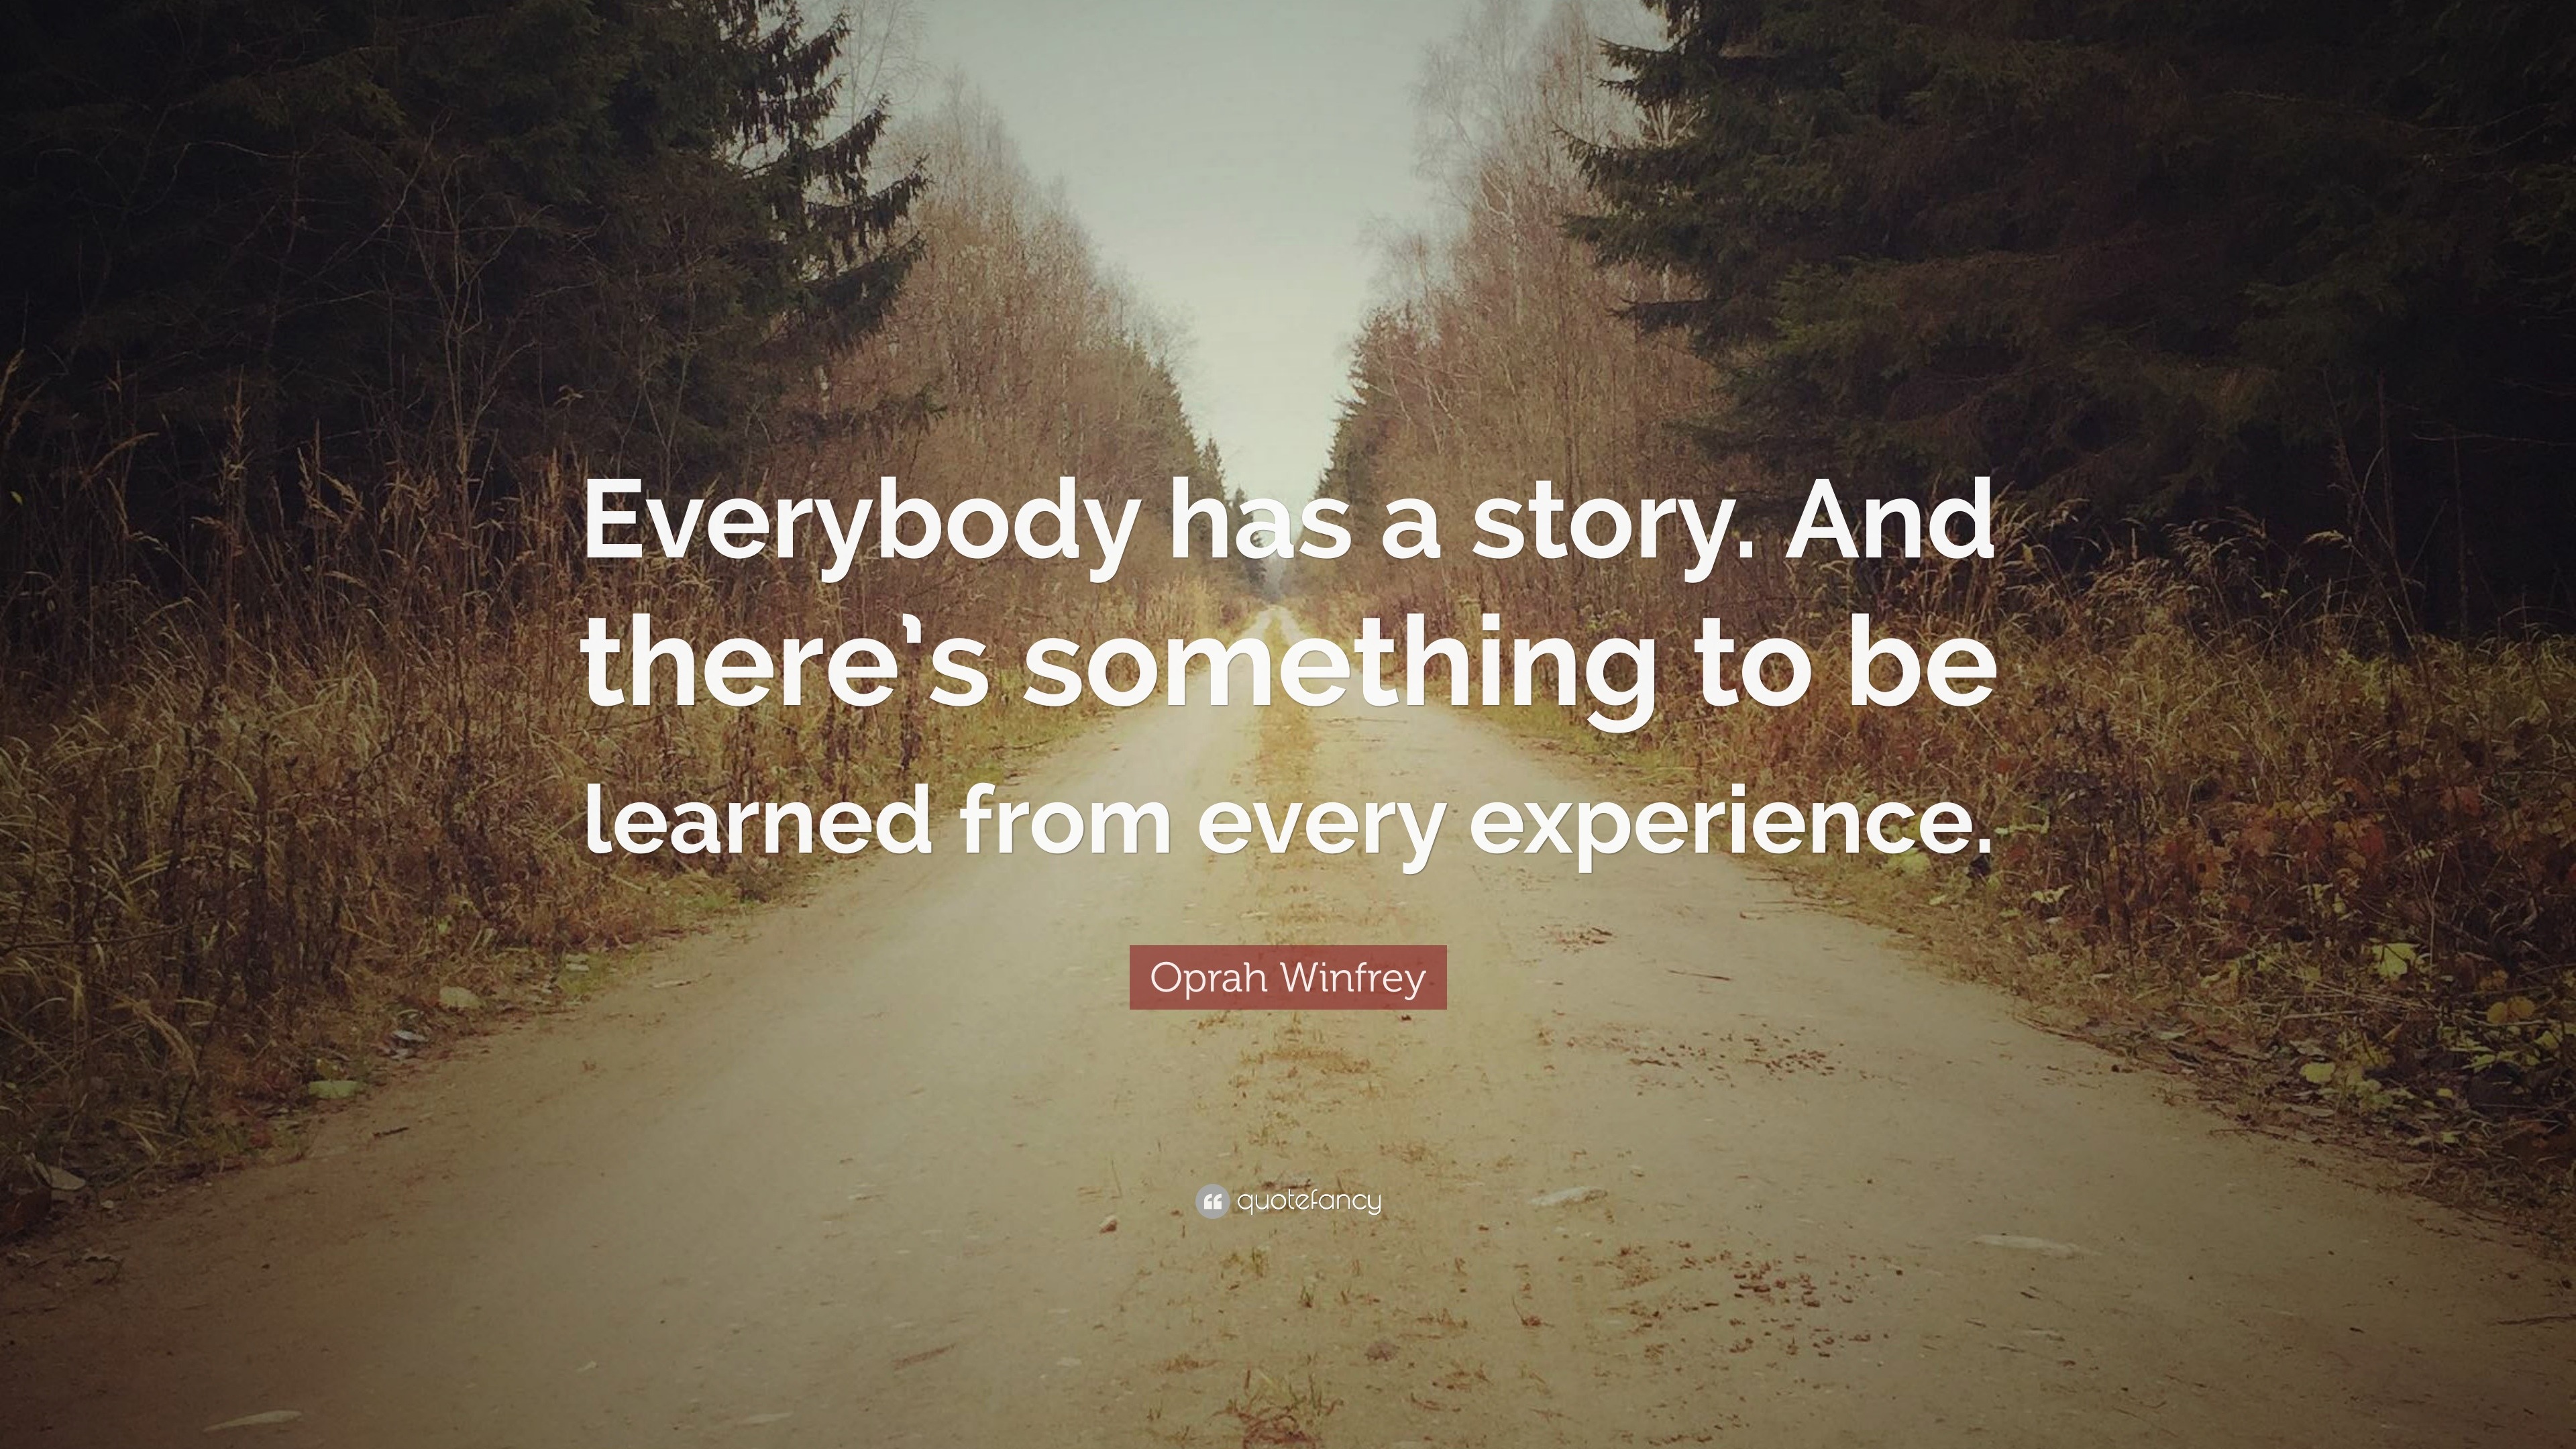 Oprah Winfrey Quote: “Everybody has a story. And there’s something to